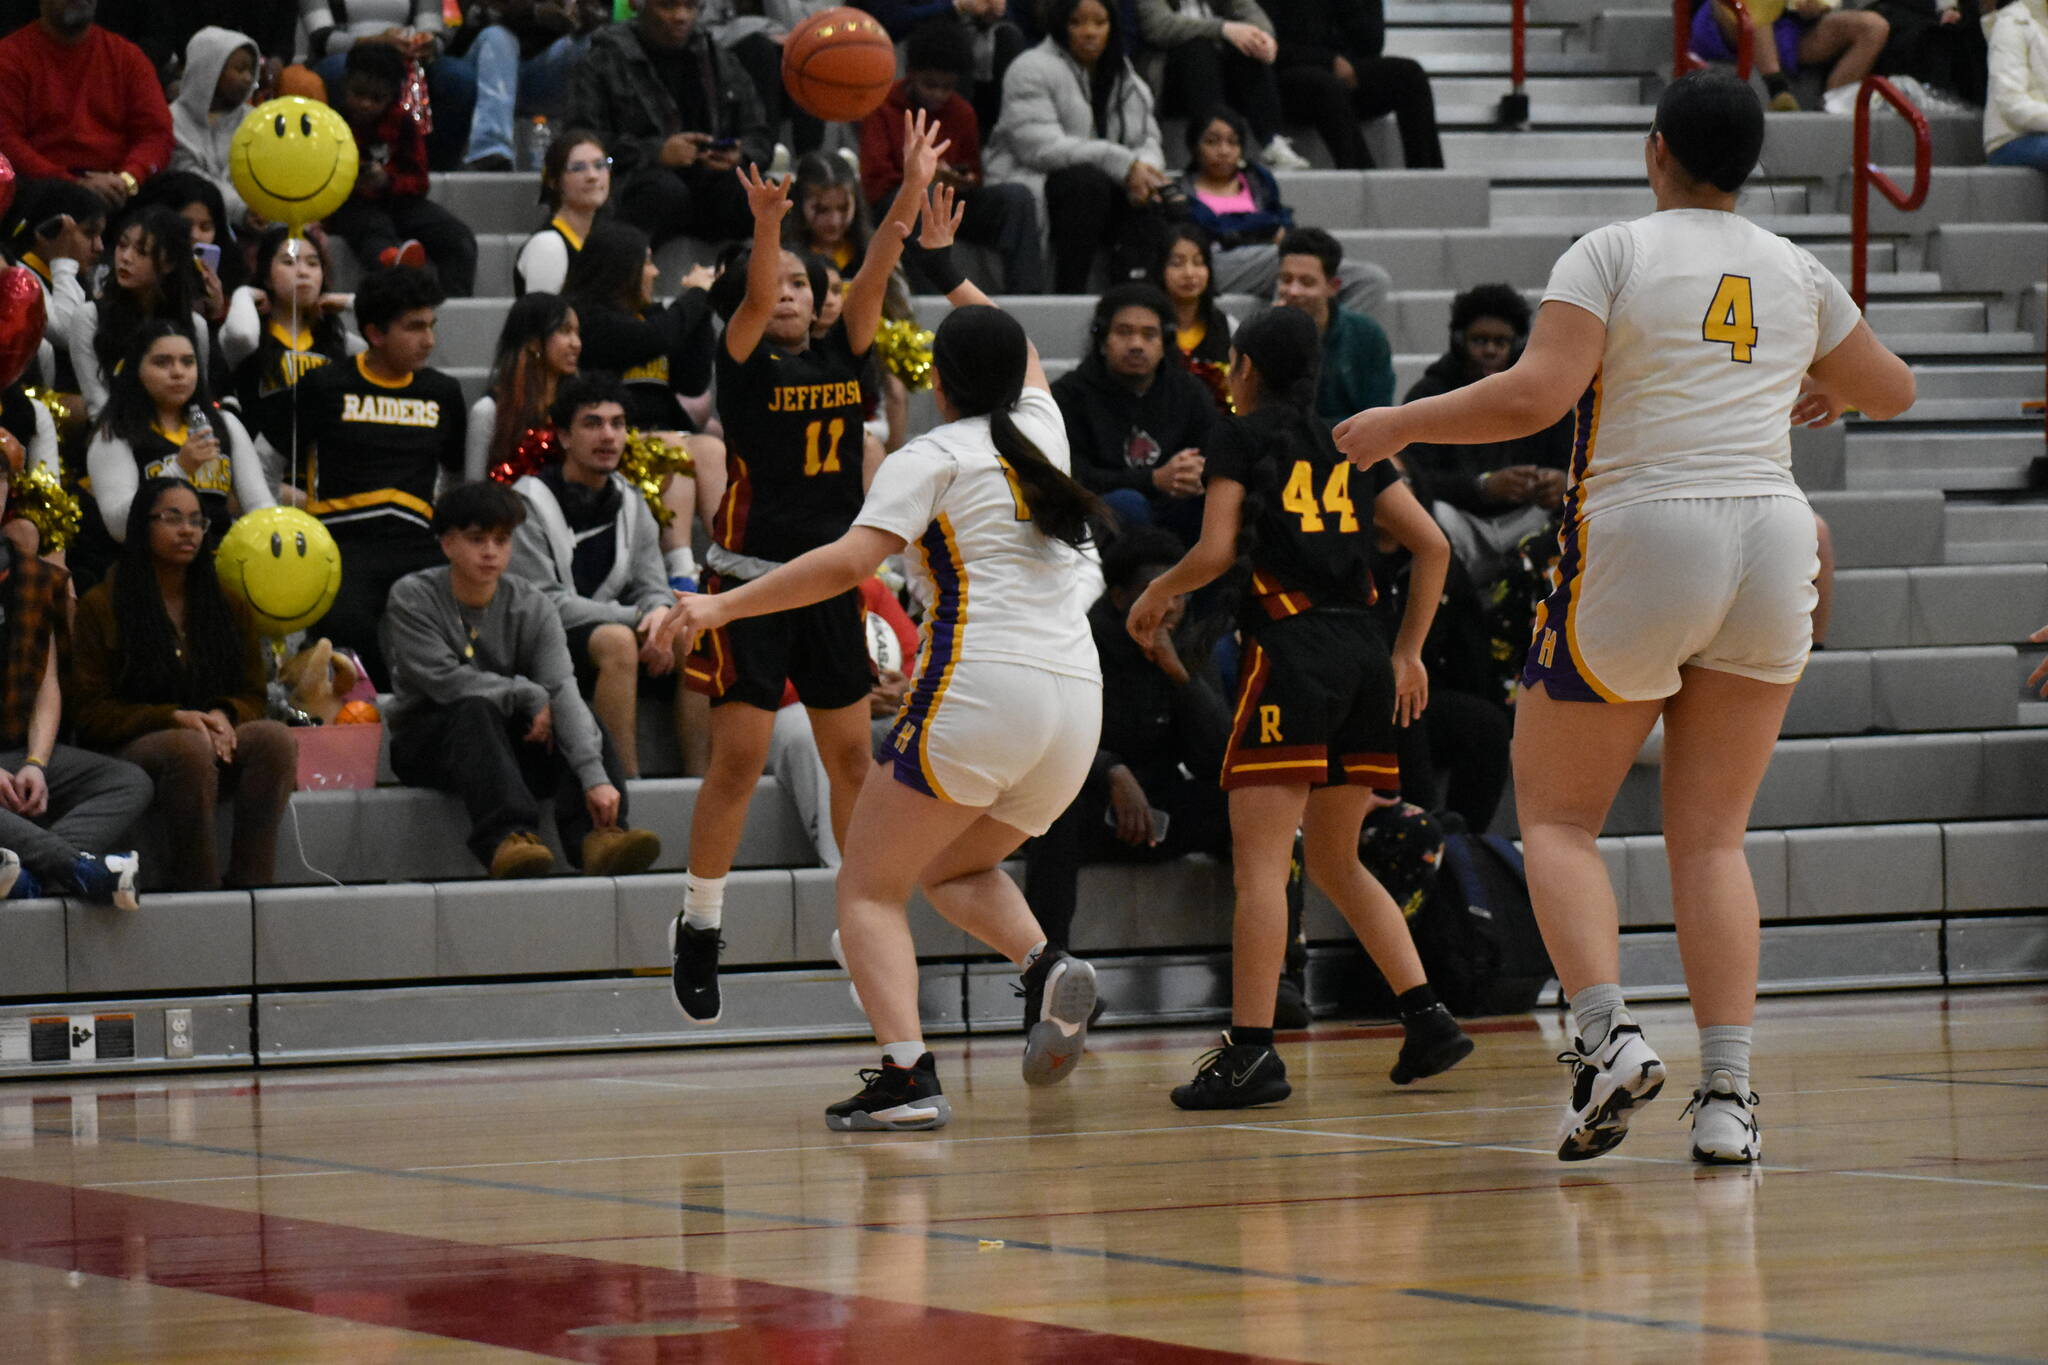 Raider senior BB Aguiman takes a jump-shot in front of her home fans. Ben Ray / The Mirror